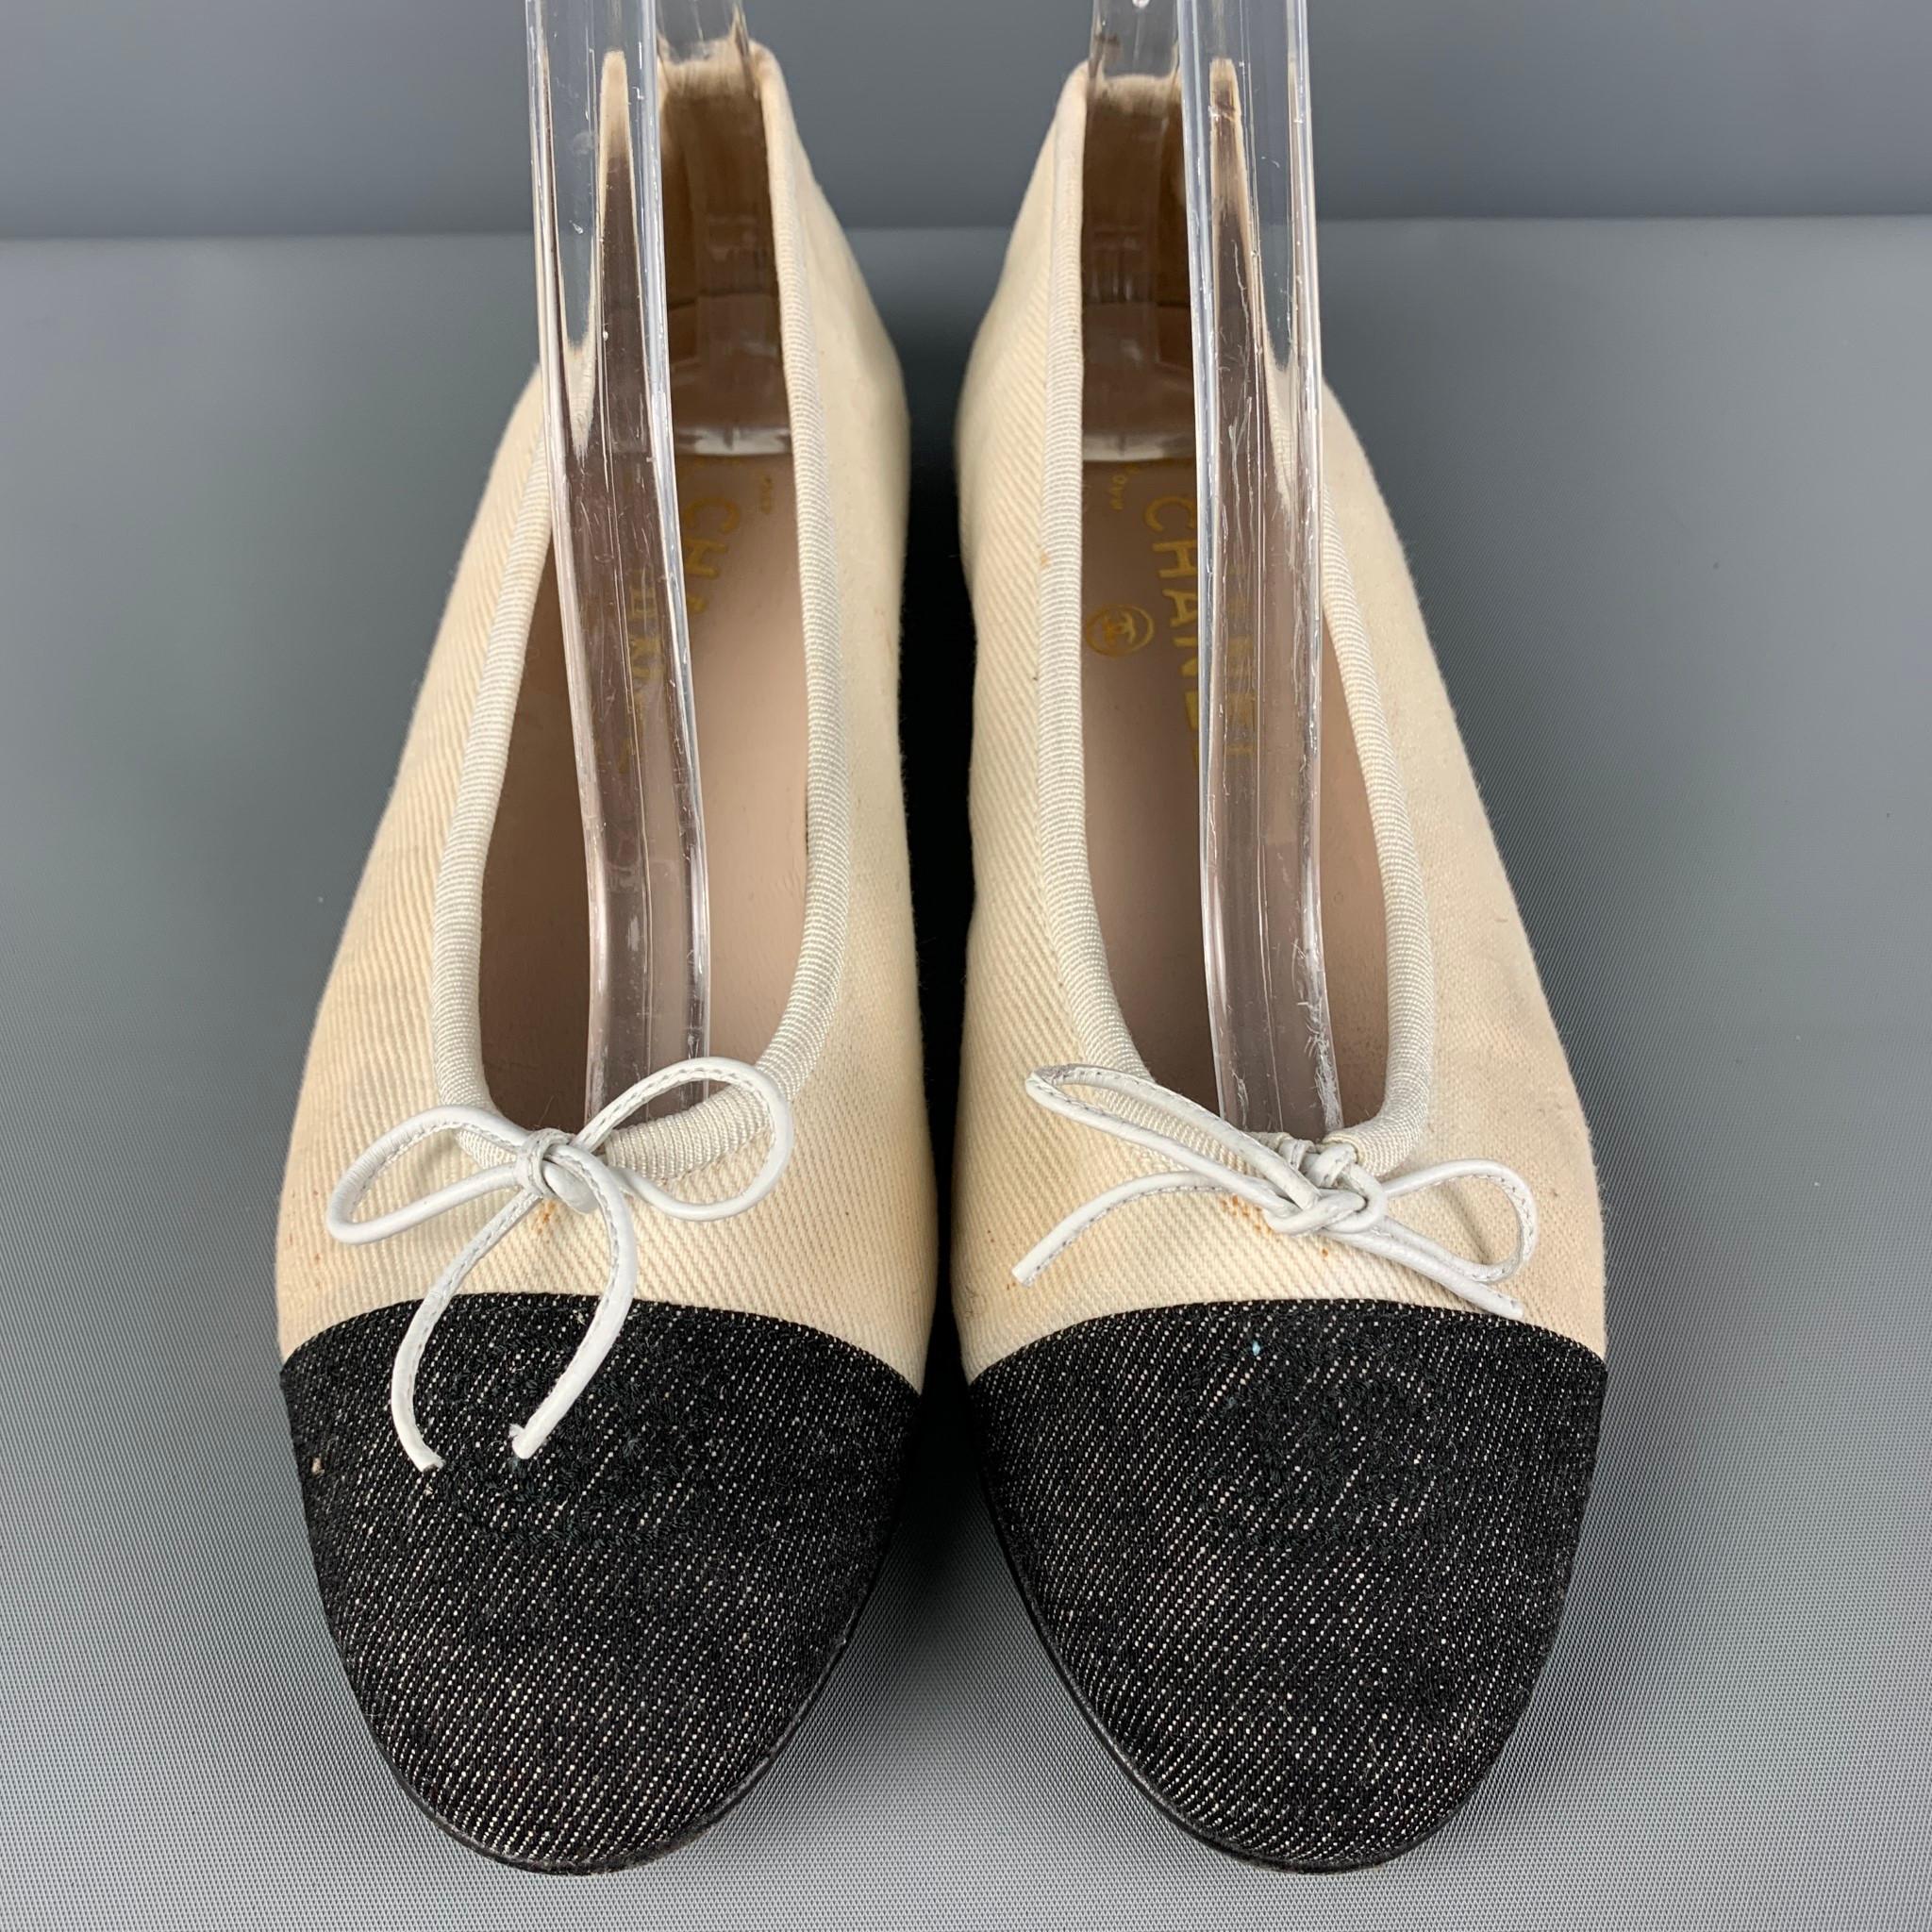 CHANEL flats comes in a cream denim with a black toe featuring a ballet style and a leather bow design. Made in Italy. 

Good Pre-Owned Condition. Moderate wear and discoloration. As-is.
Marked: 36.5

Measurements:

Outsole: 9.5 in. x 3 in.